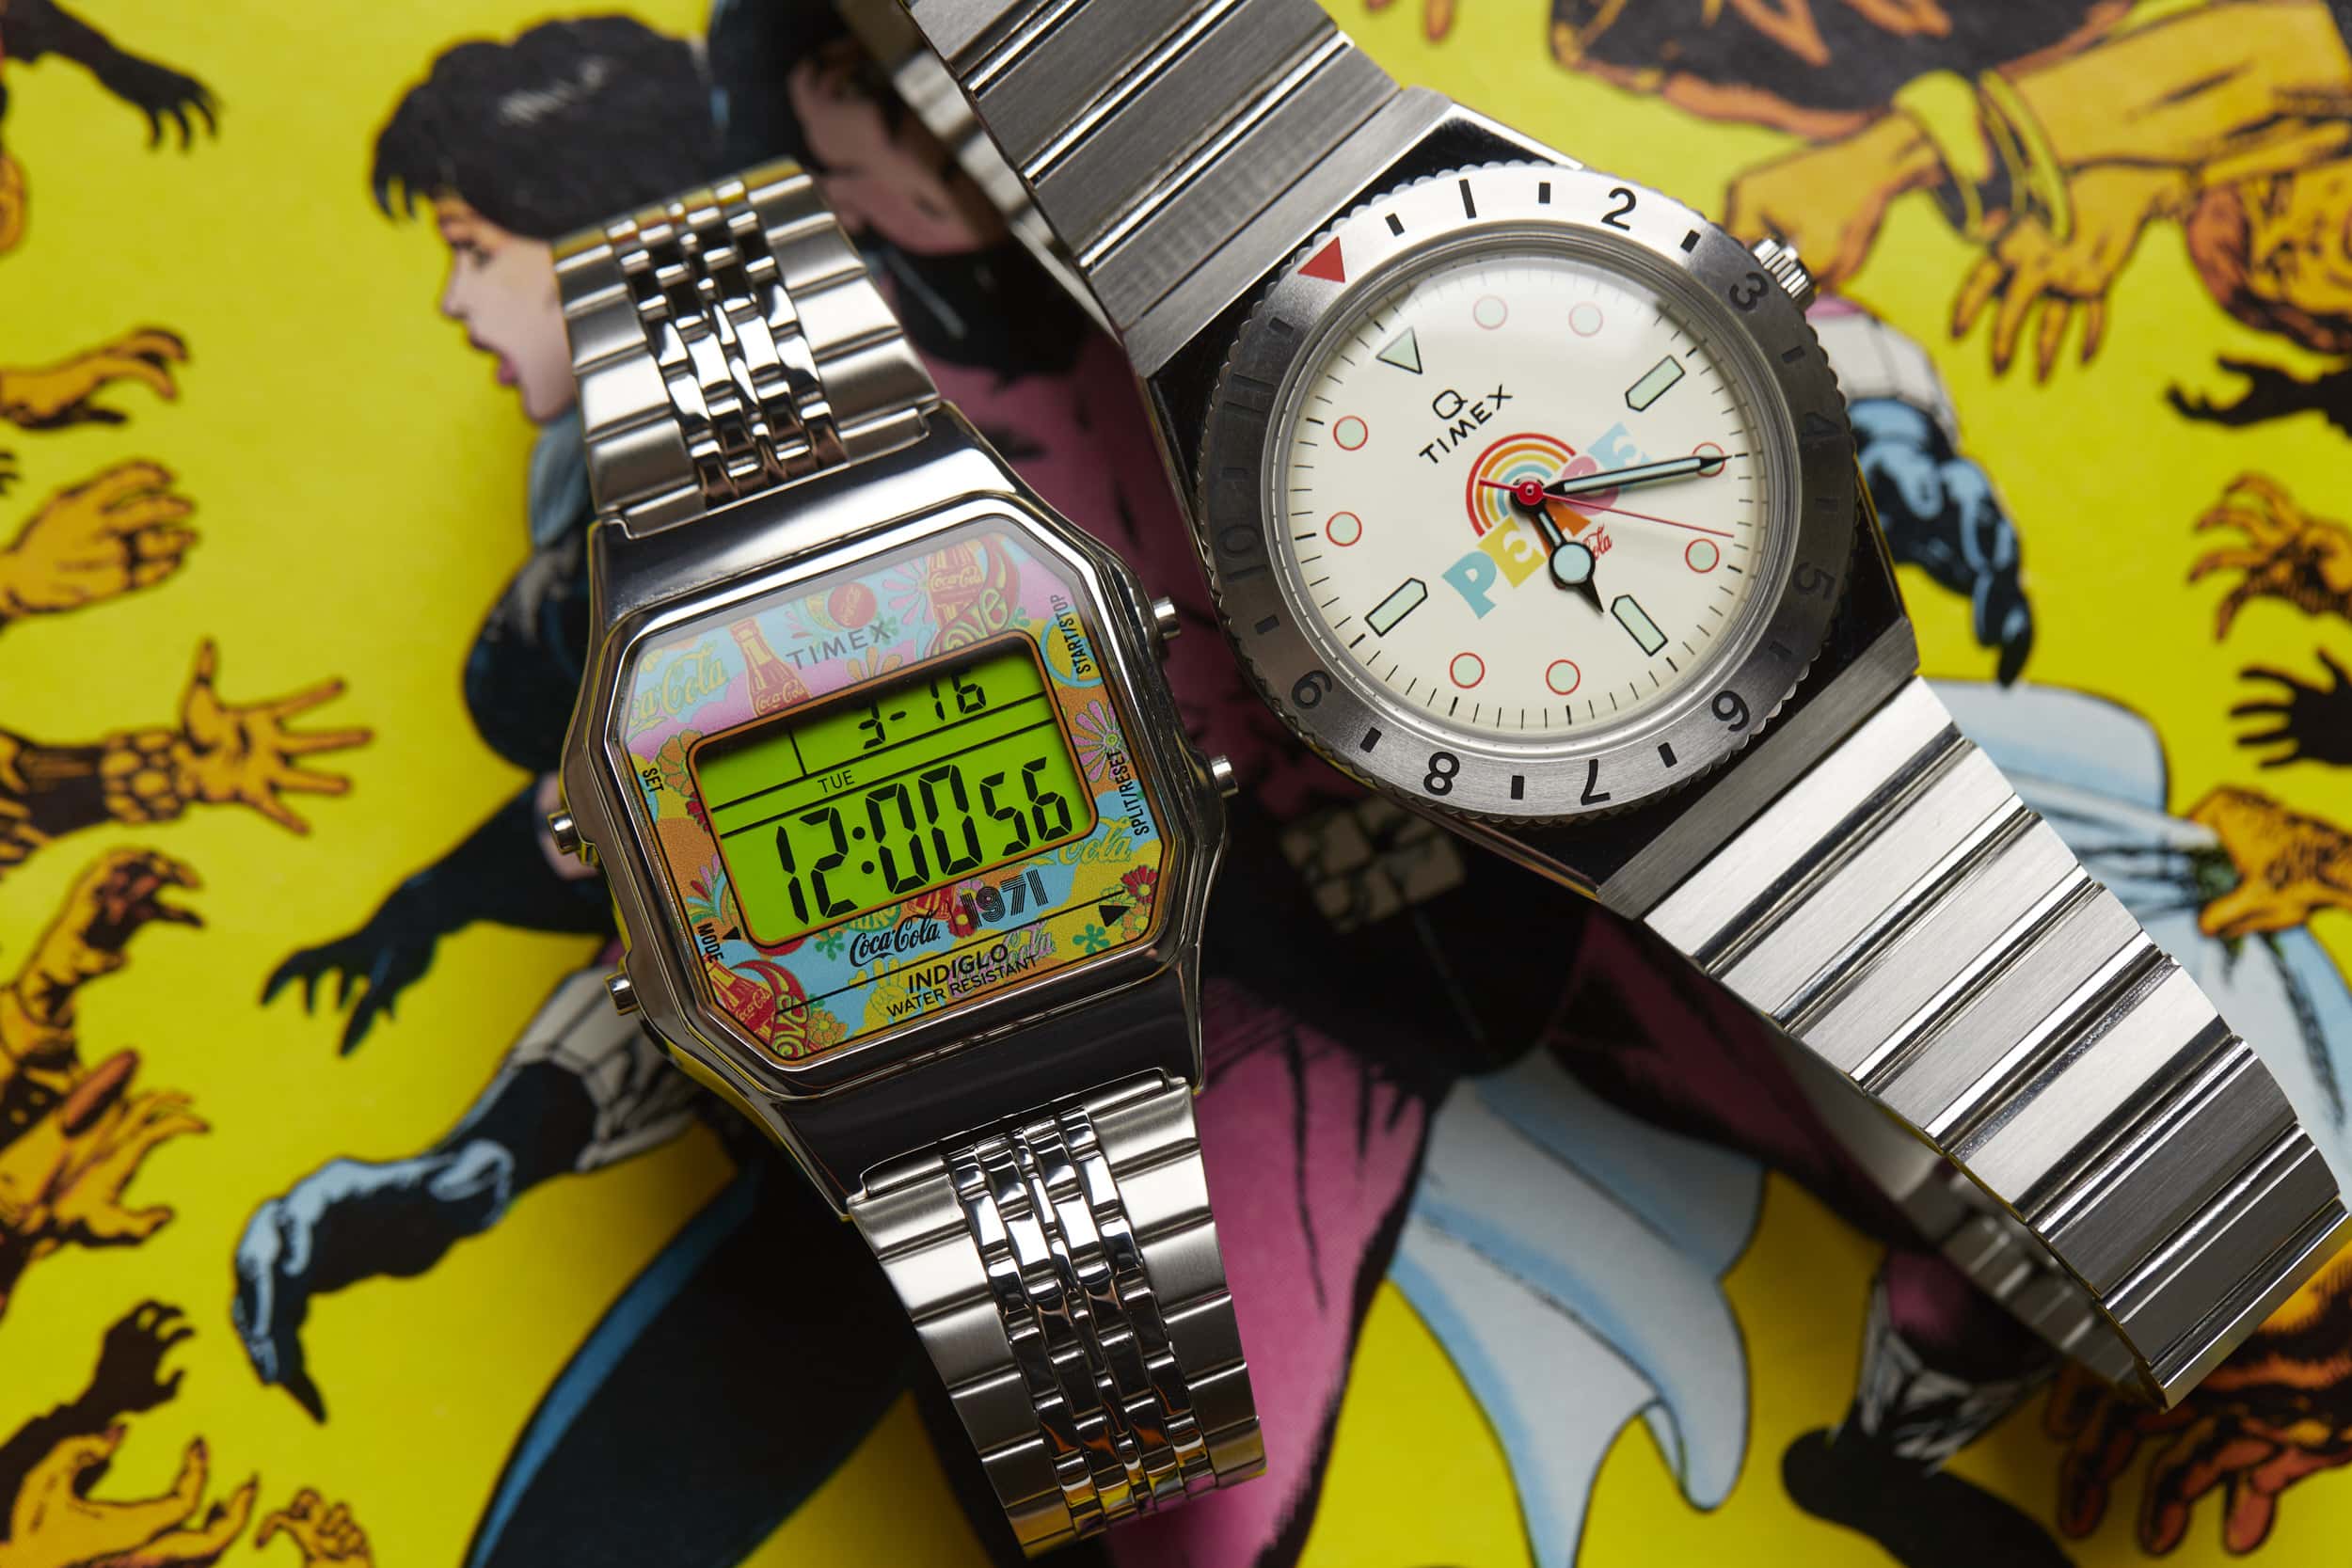 New Affordable Retro Watches from Casio and Timex: Now Available at the Windup Watch Shop